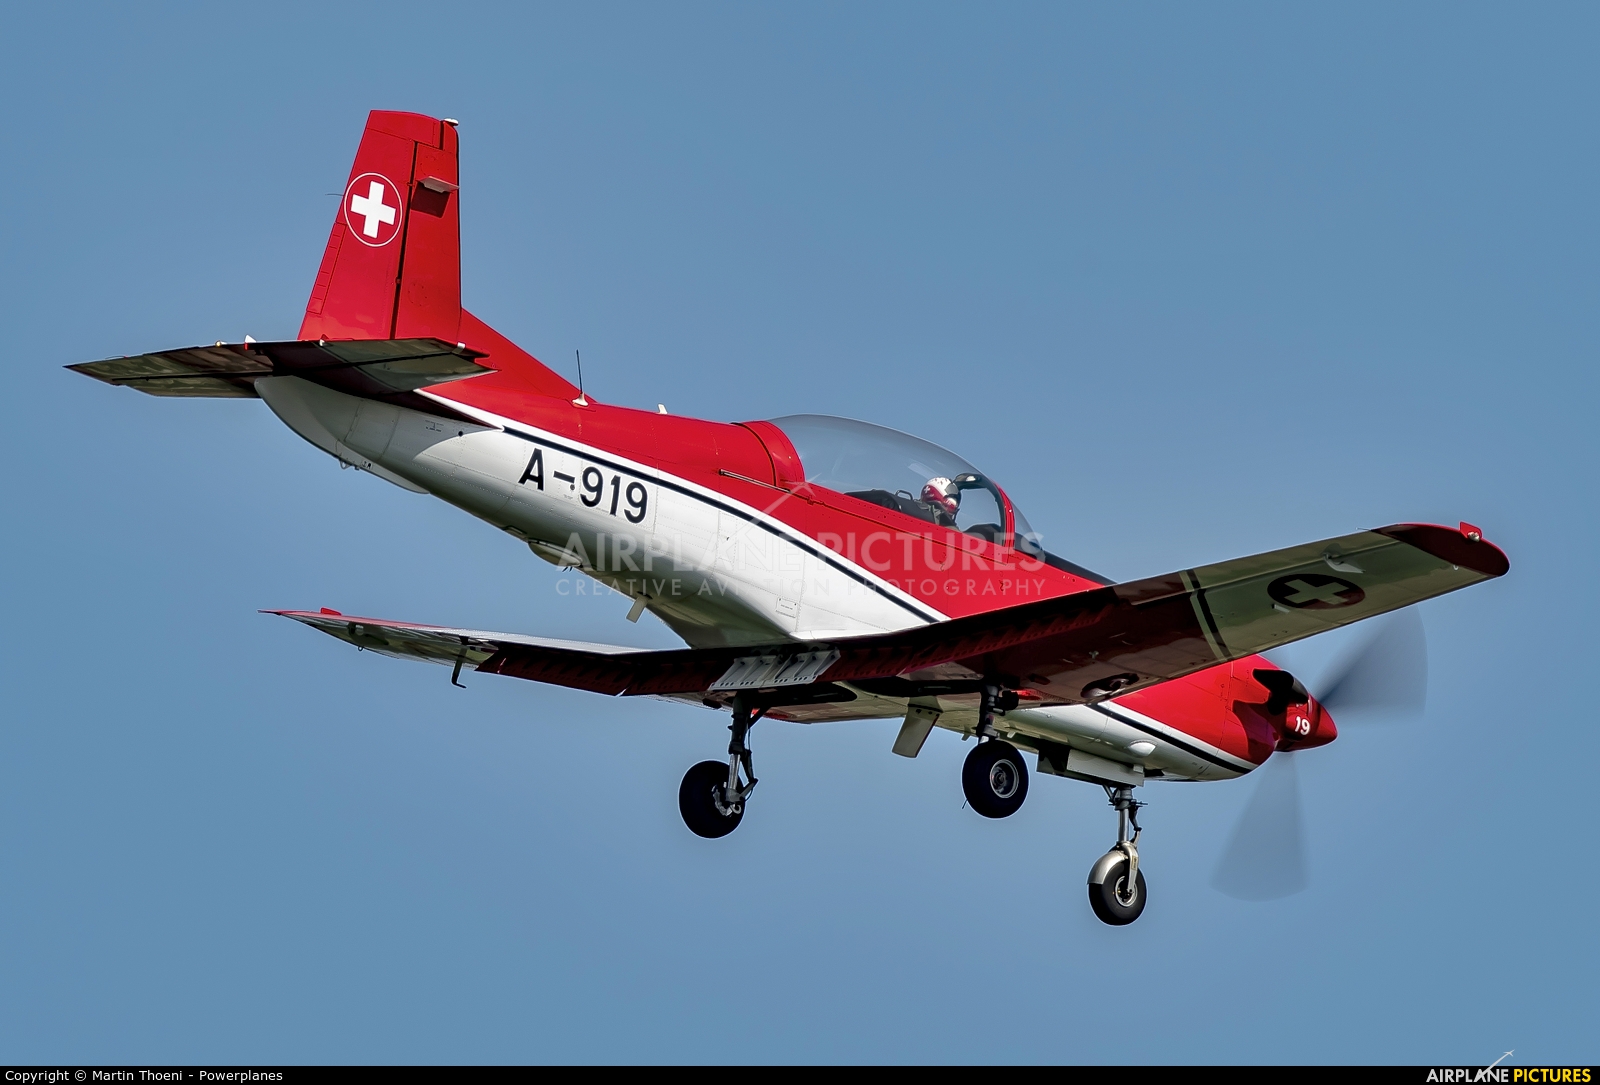 Switzerland - Air Force: PC-7 Team A-919 aircraft at Payerne